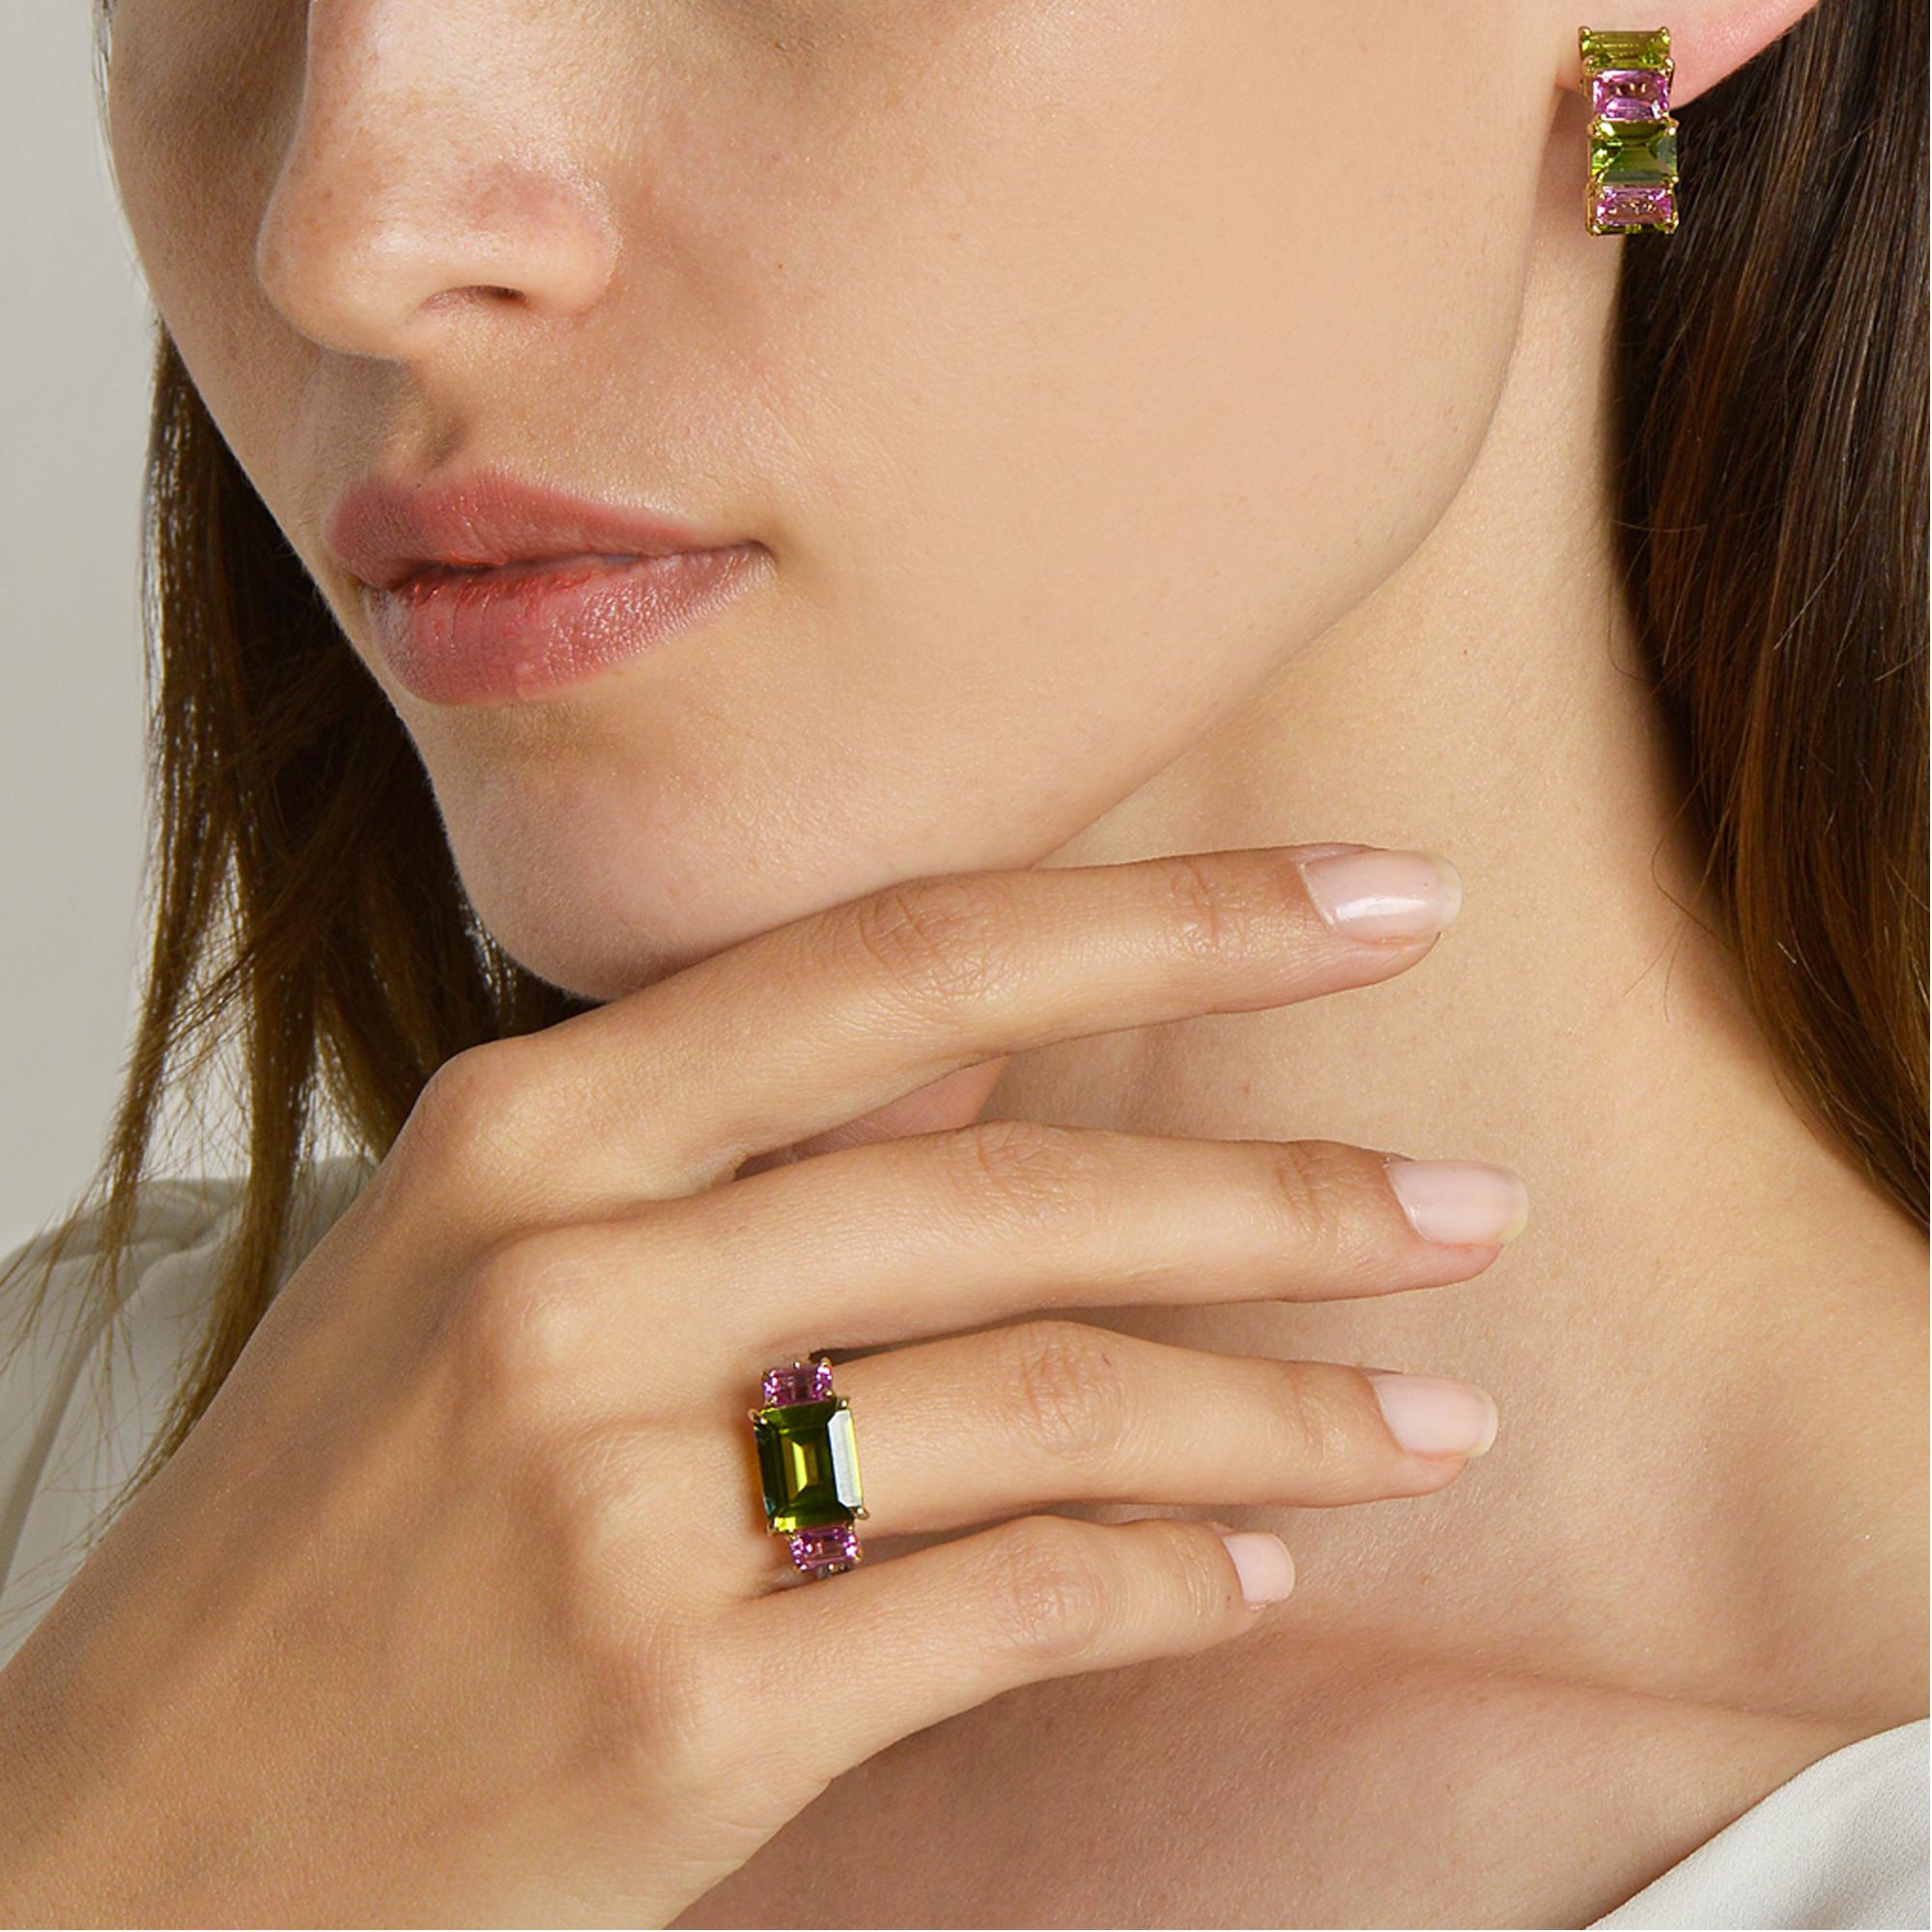 18 karat yellow gold Florentine earrings set with emerald-cut peridots and pink sapphires. 

Inspired by the Garden of Iris, the Florentine collection pairs bold color combinations of geometric gemstones to translate Paolo Costagli's memories of